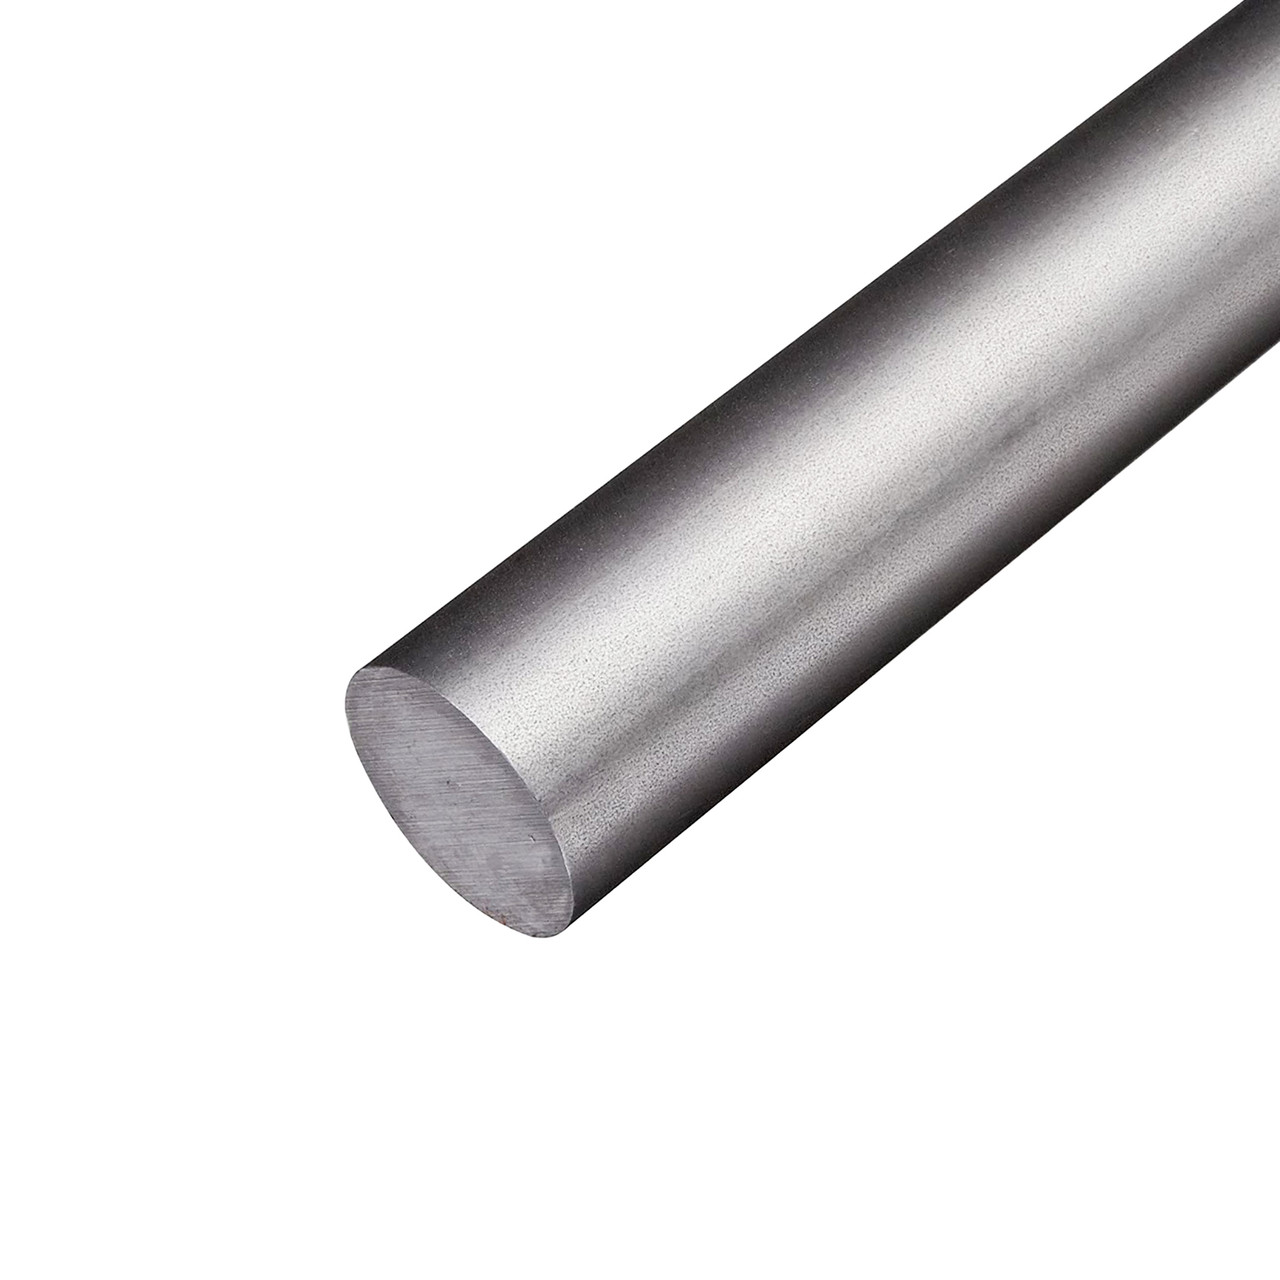 0.390 (25/64 inch) x 47 inches, 1144 Stressproof Steel Round Rod, Cold Finished